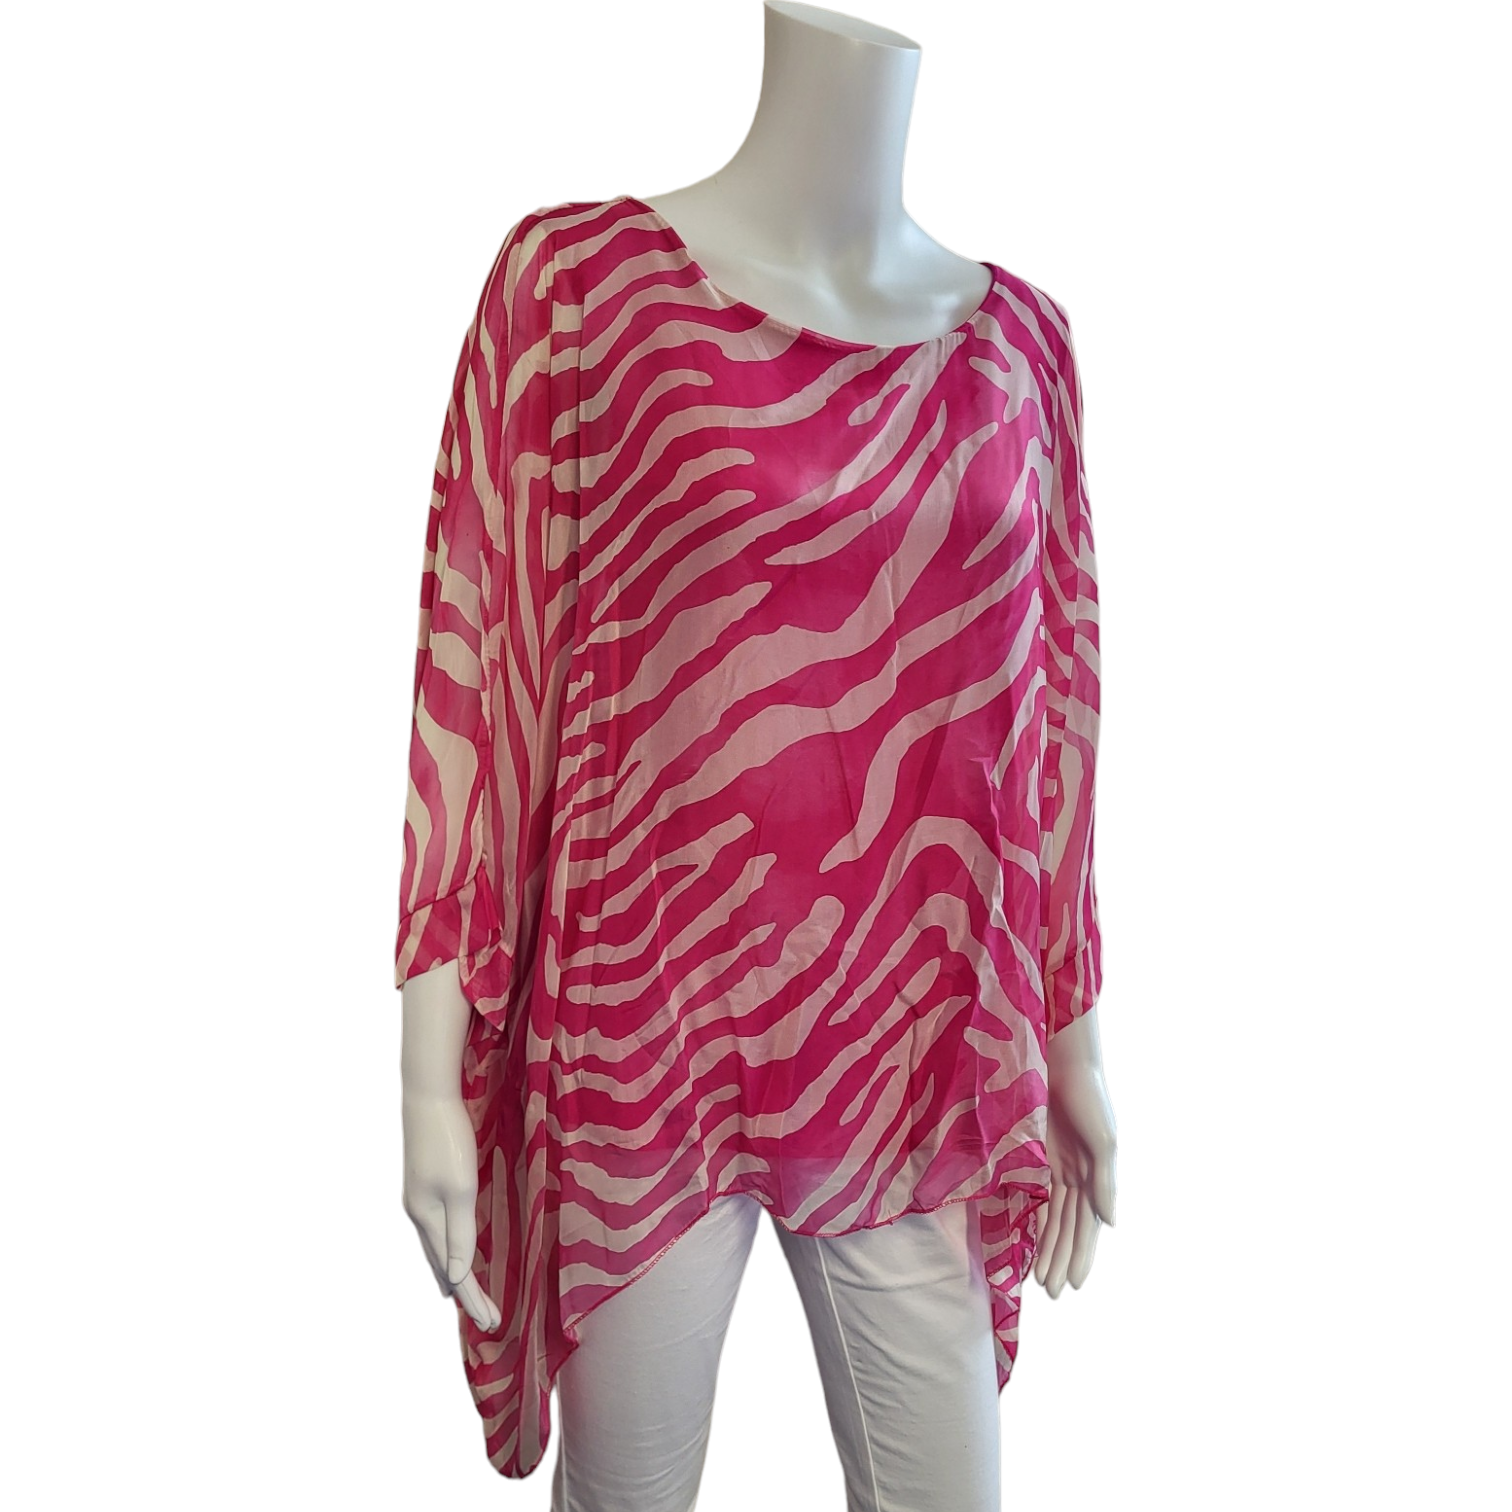 pink and white zebra printed top in a silky material with dipped sides